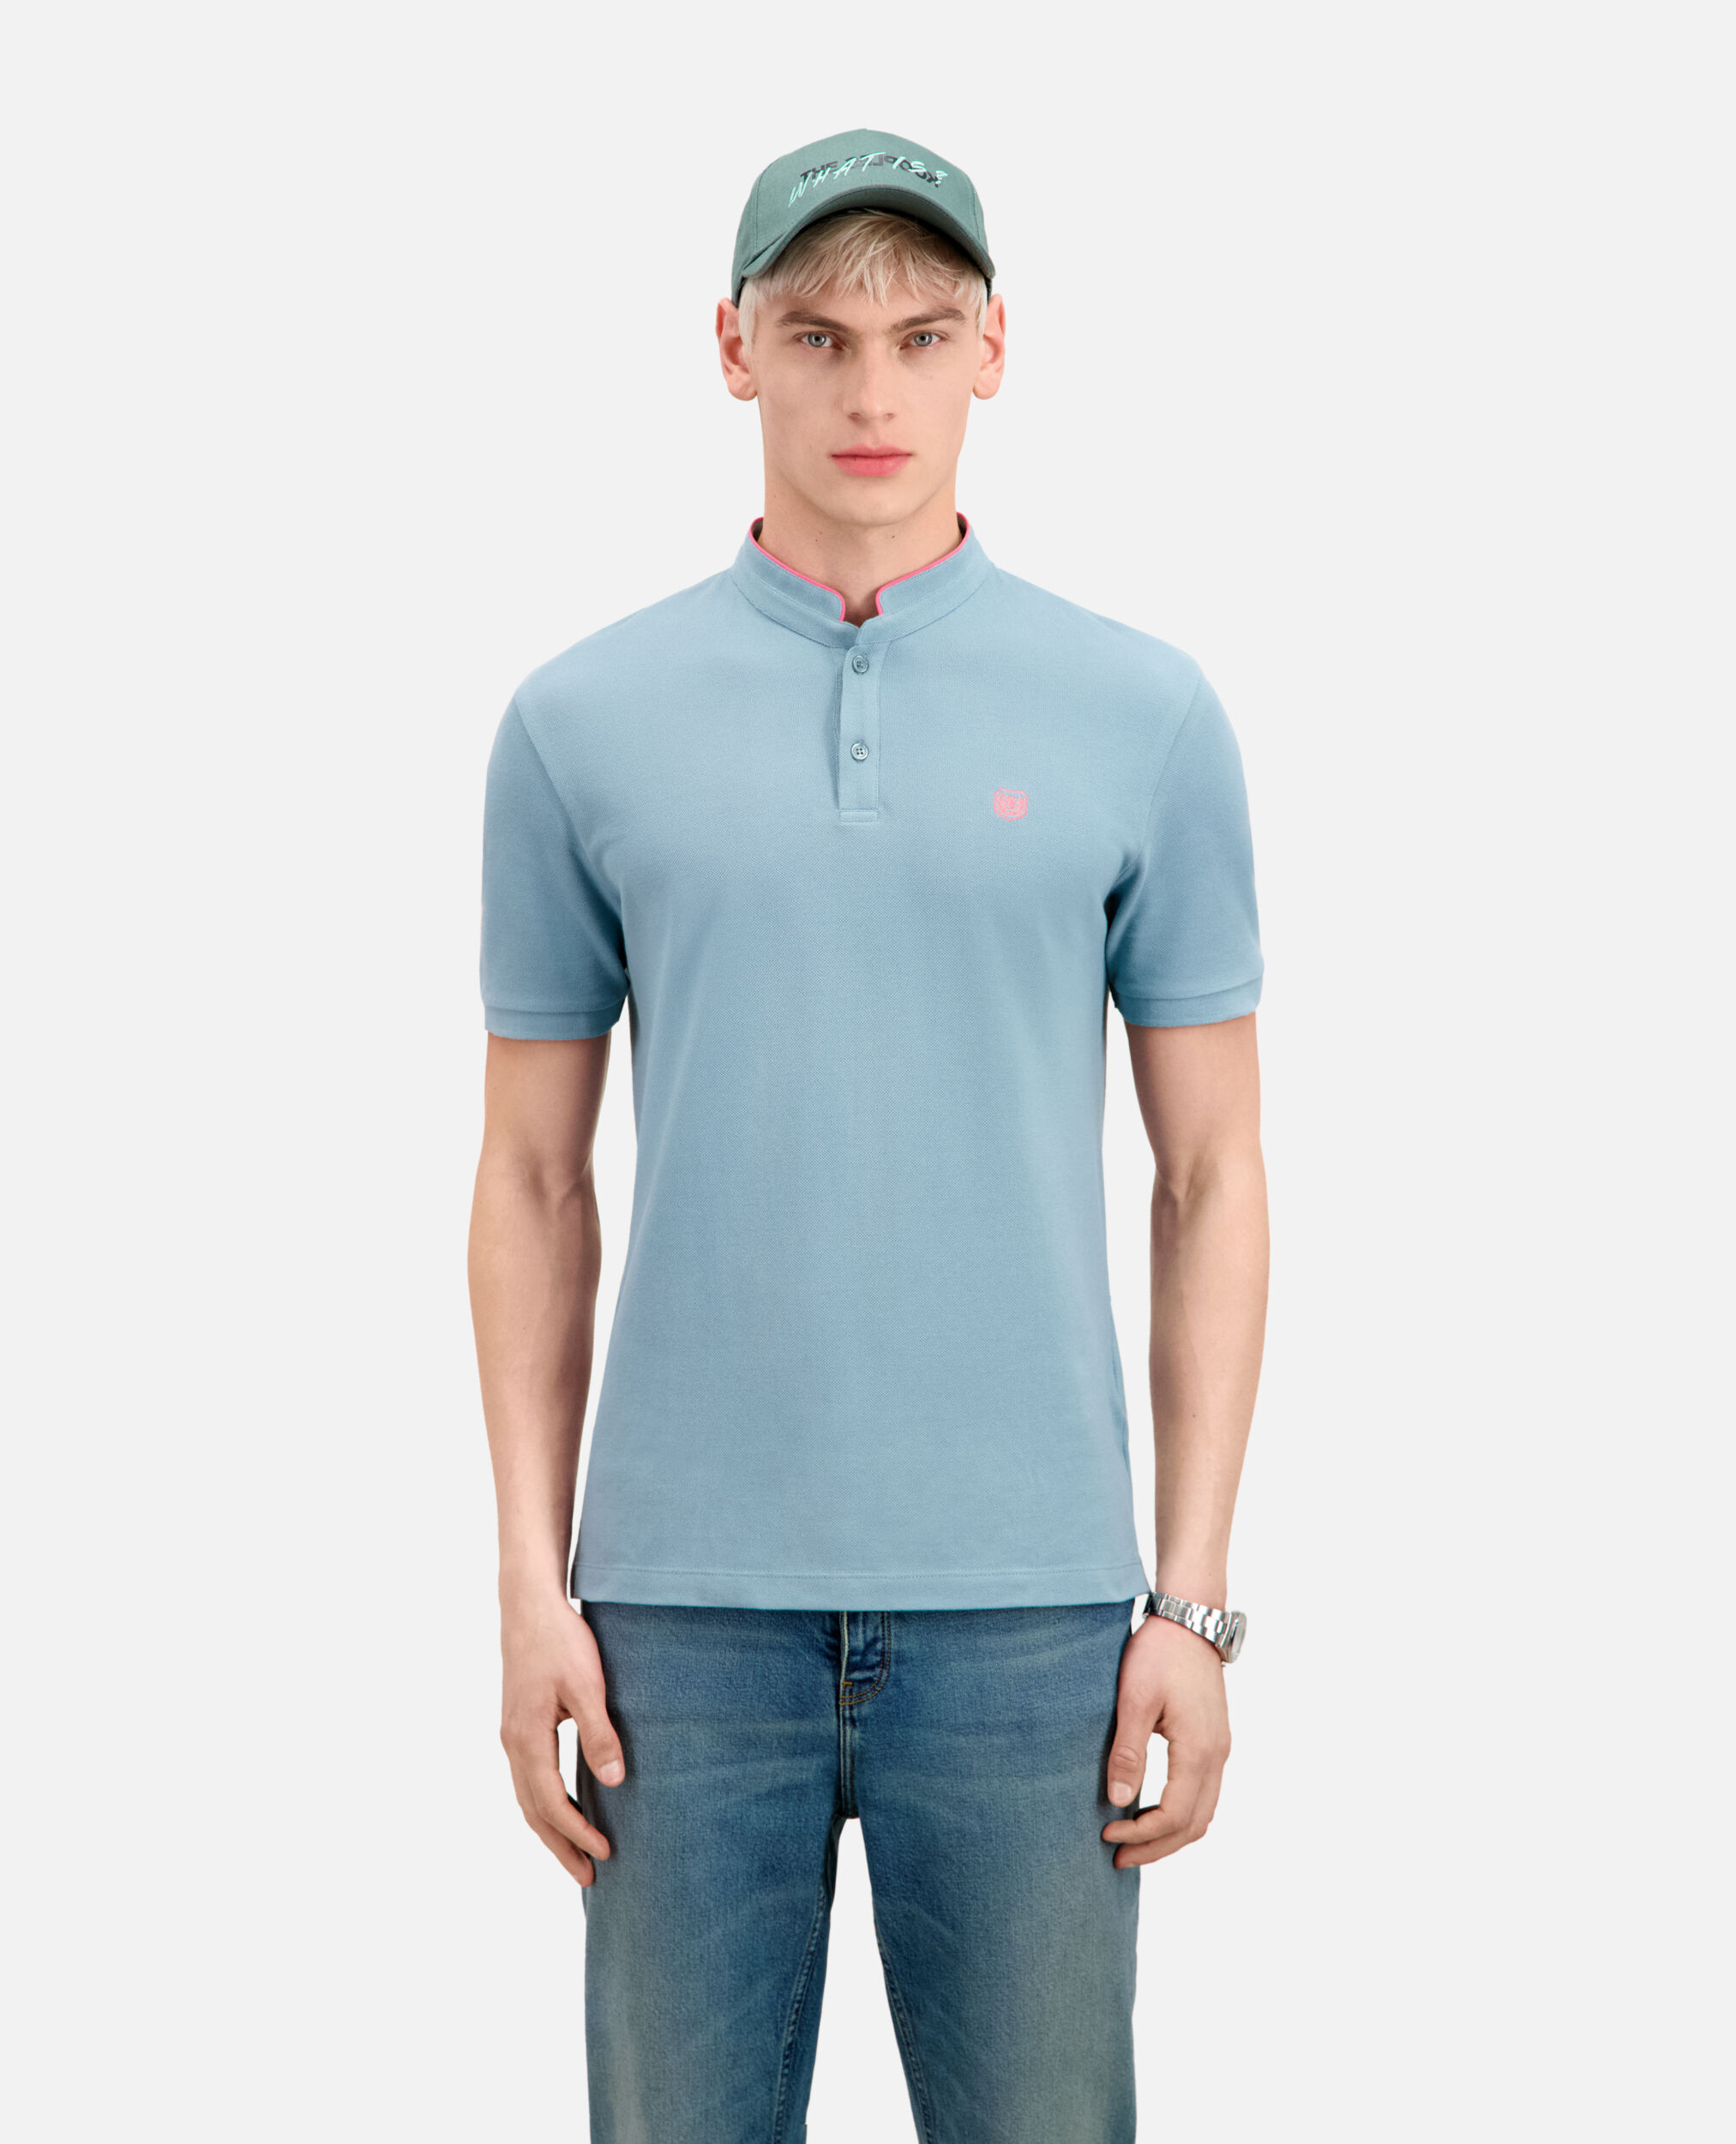 Light blue cotton polo t-shirt, BLUE GREY, hi-res image number null